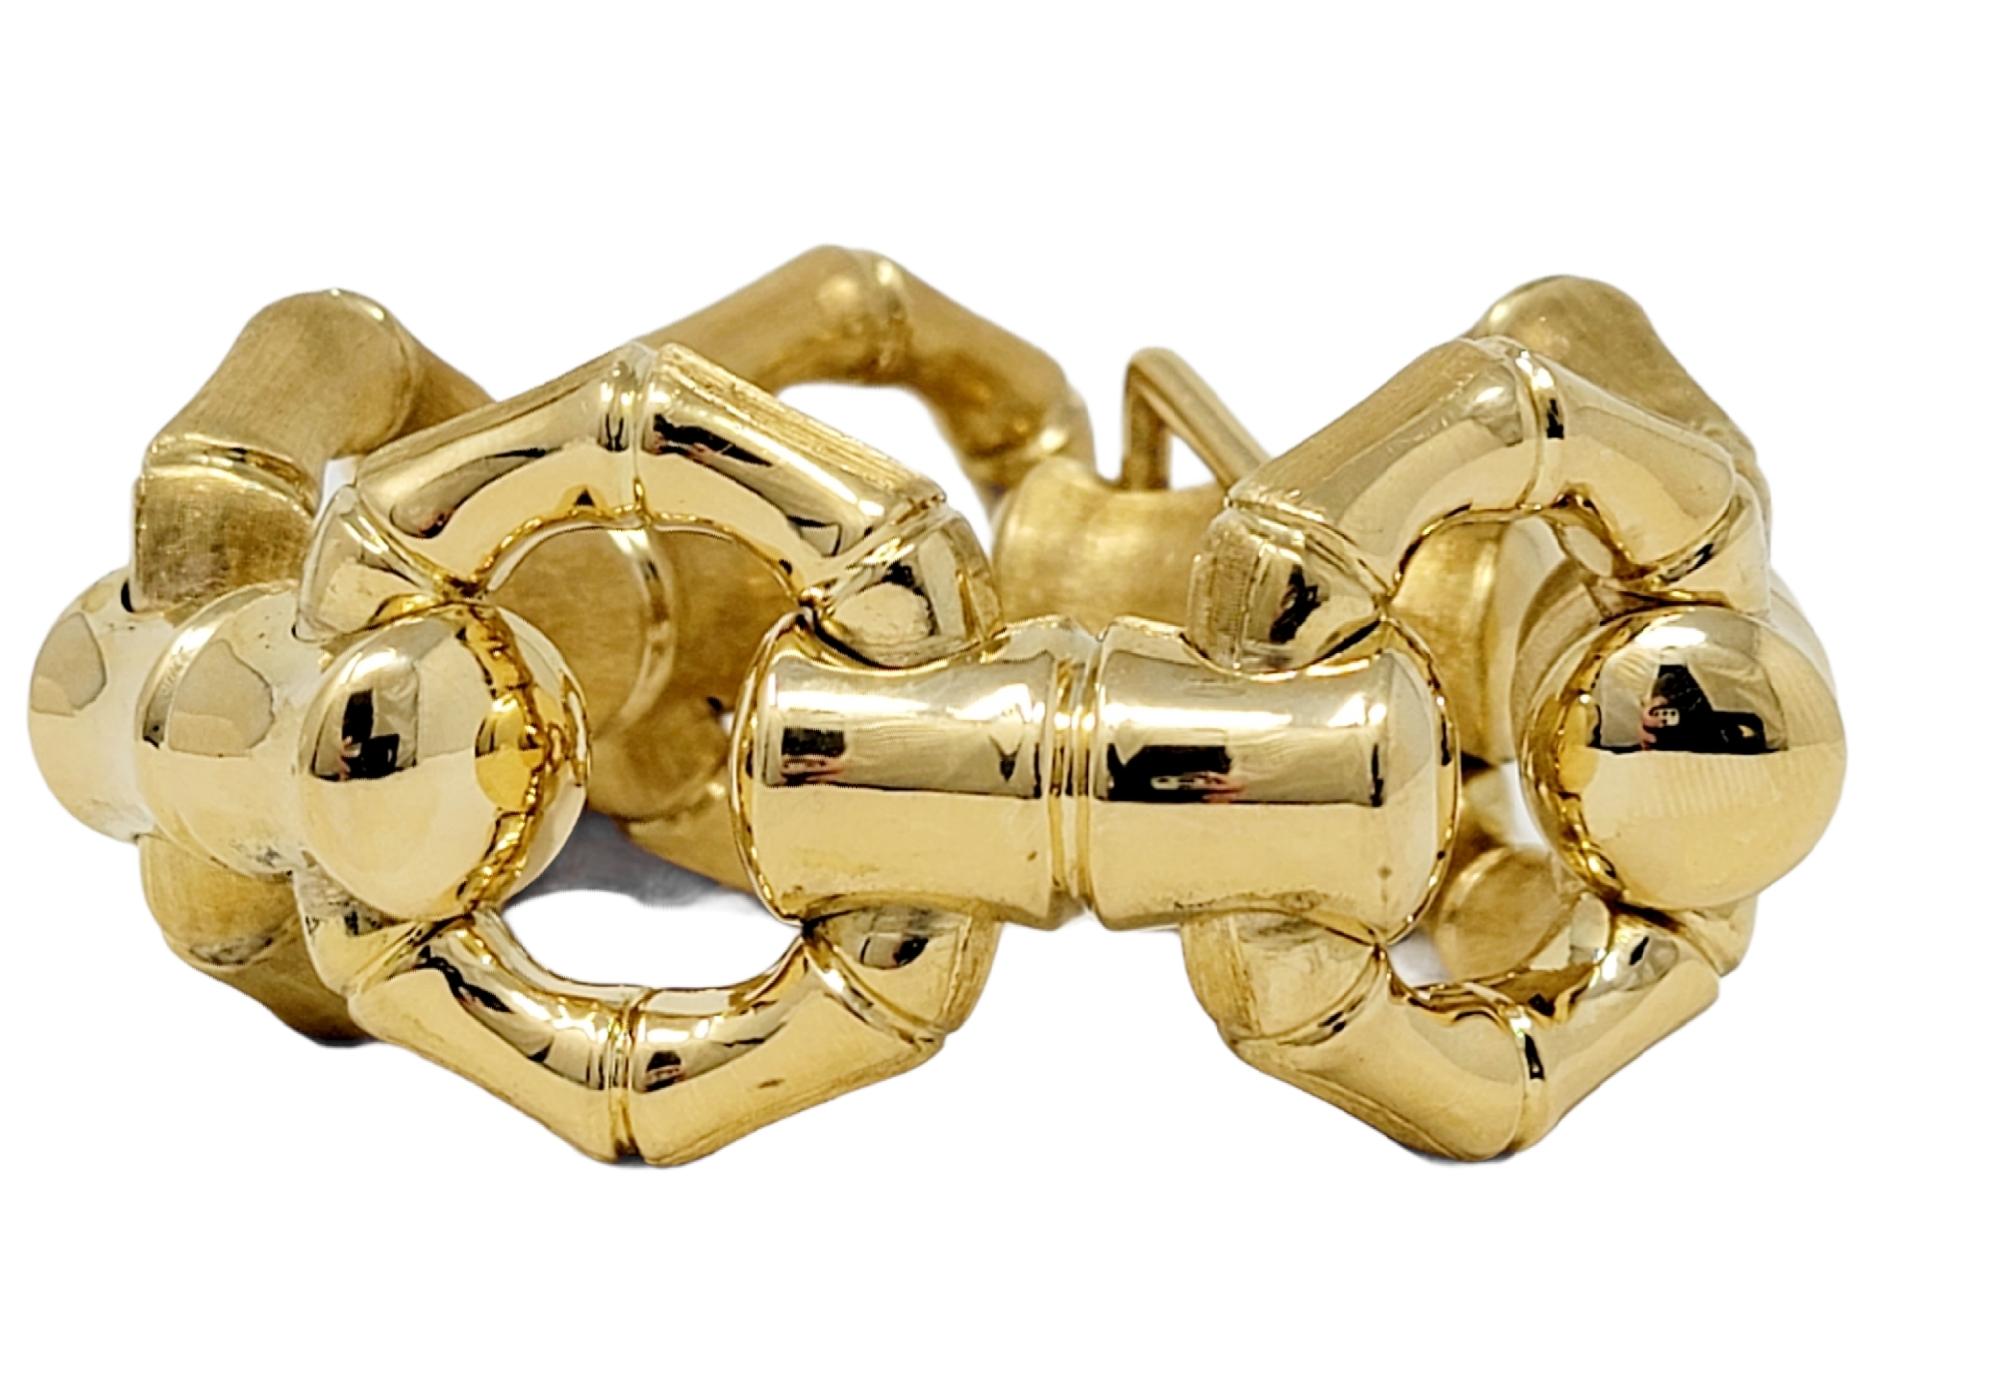 This incredible 18 karat yellow gold link bracelet with its chunky, over-sized style was built to make a statement! Featuring a reversible bamboo link design, this sizeable bracelet can be worn two ways for two unique looks. One side features a